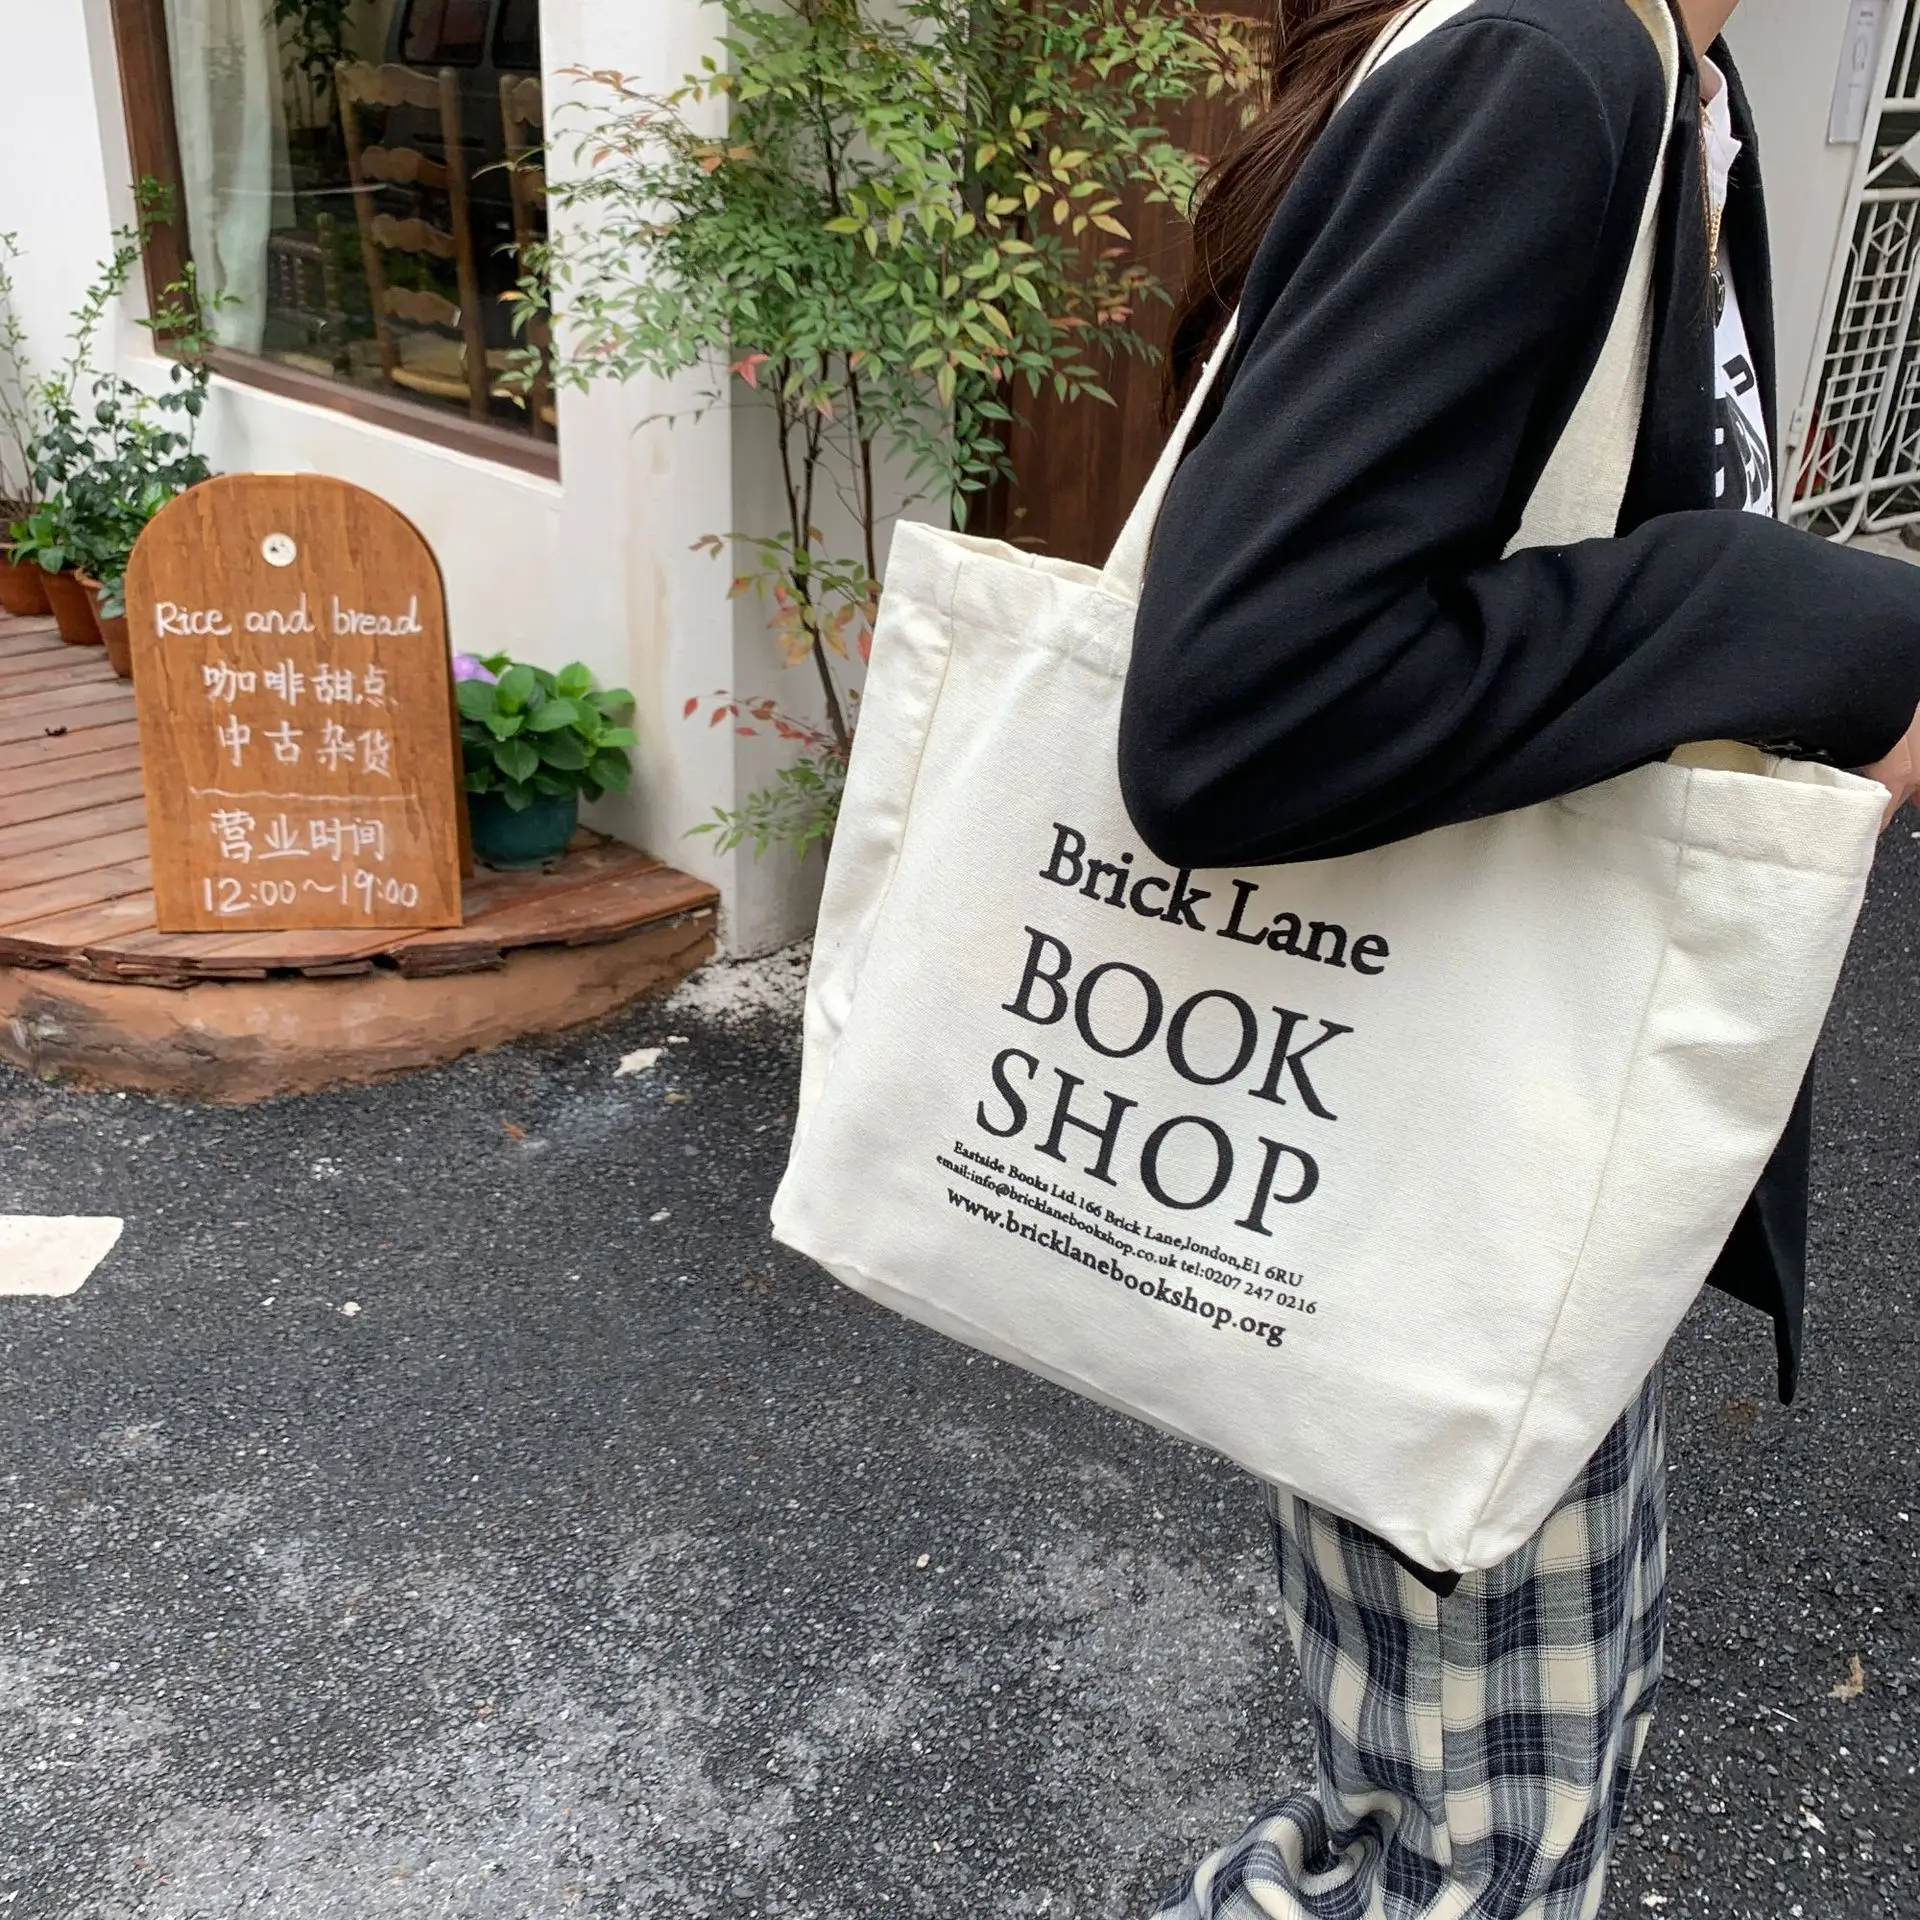 Women's Canvas Shoulder Bag Book Shop Printing Female Shopping Totes Travel Handbags Storage Pouch Bookbags For Young Students